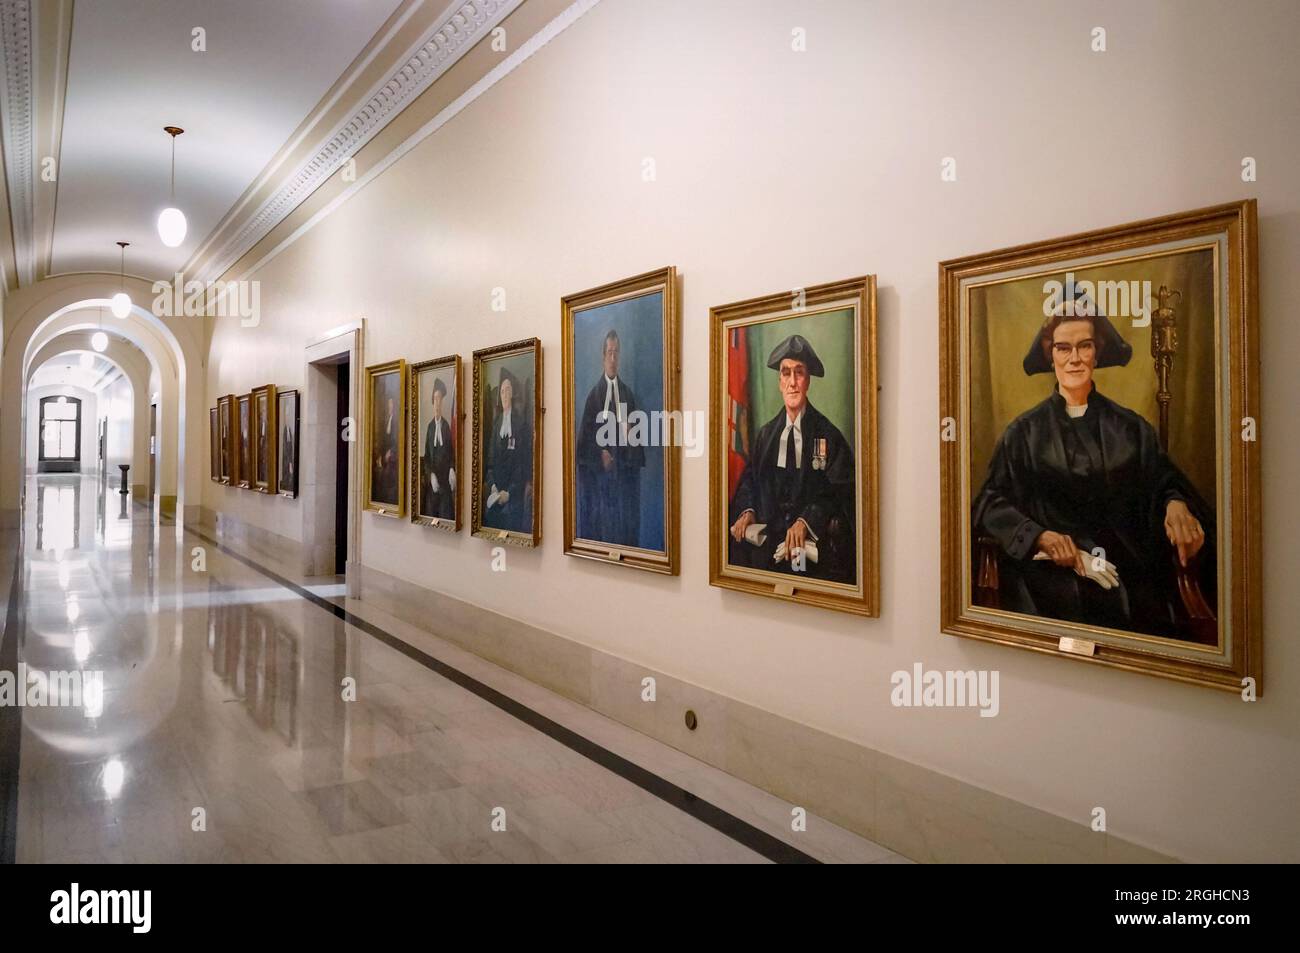 Winnipeg, Manitoba, Canada - 11 21 2014: Part of the interior of Manitoba Legislature building with Speakers Gallery of Portraits located on the Stock Photo